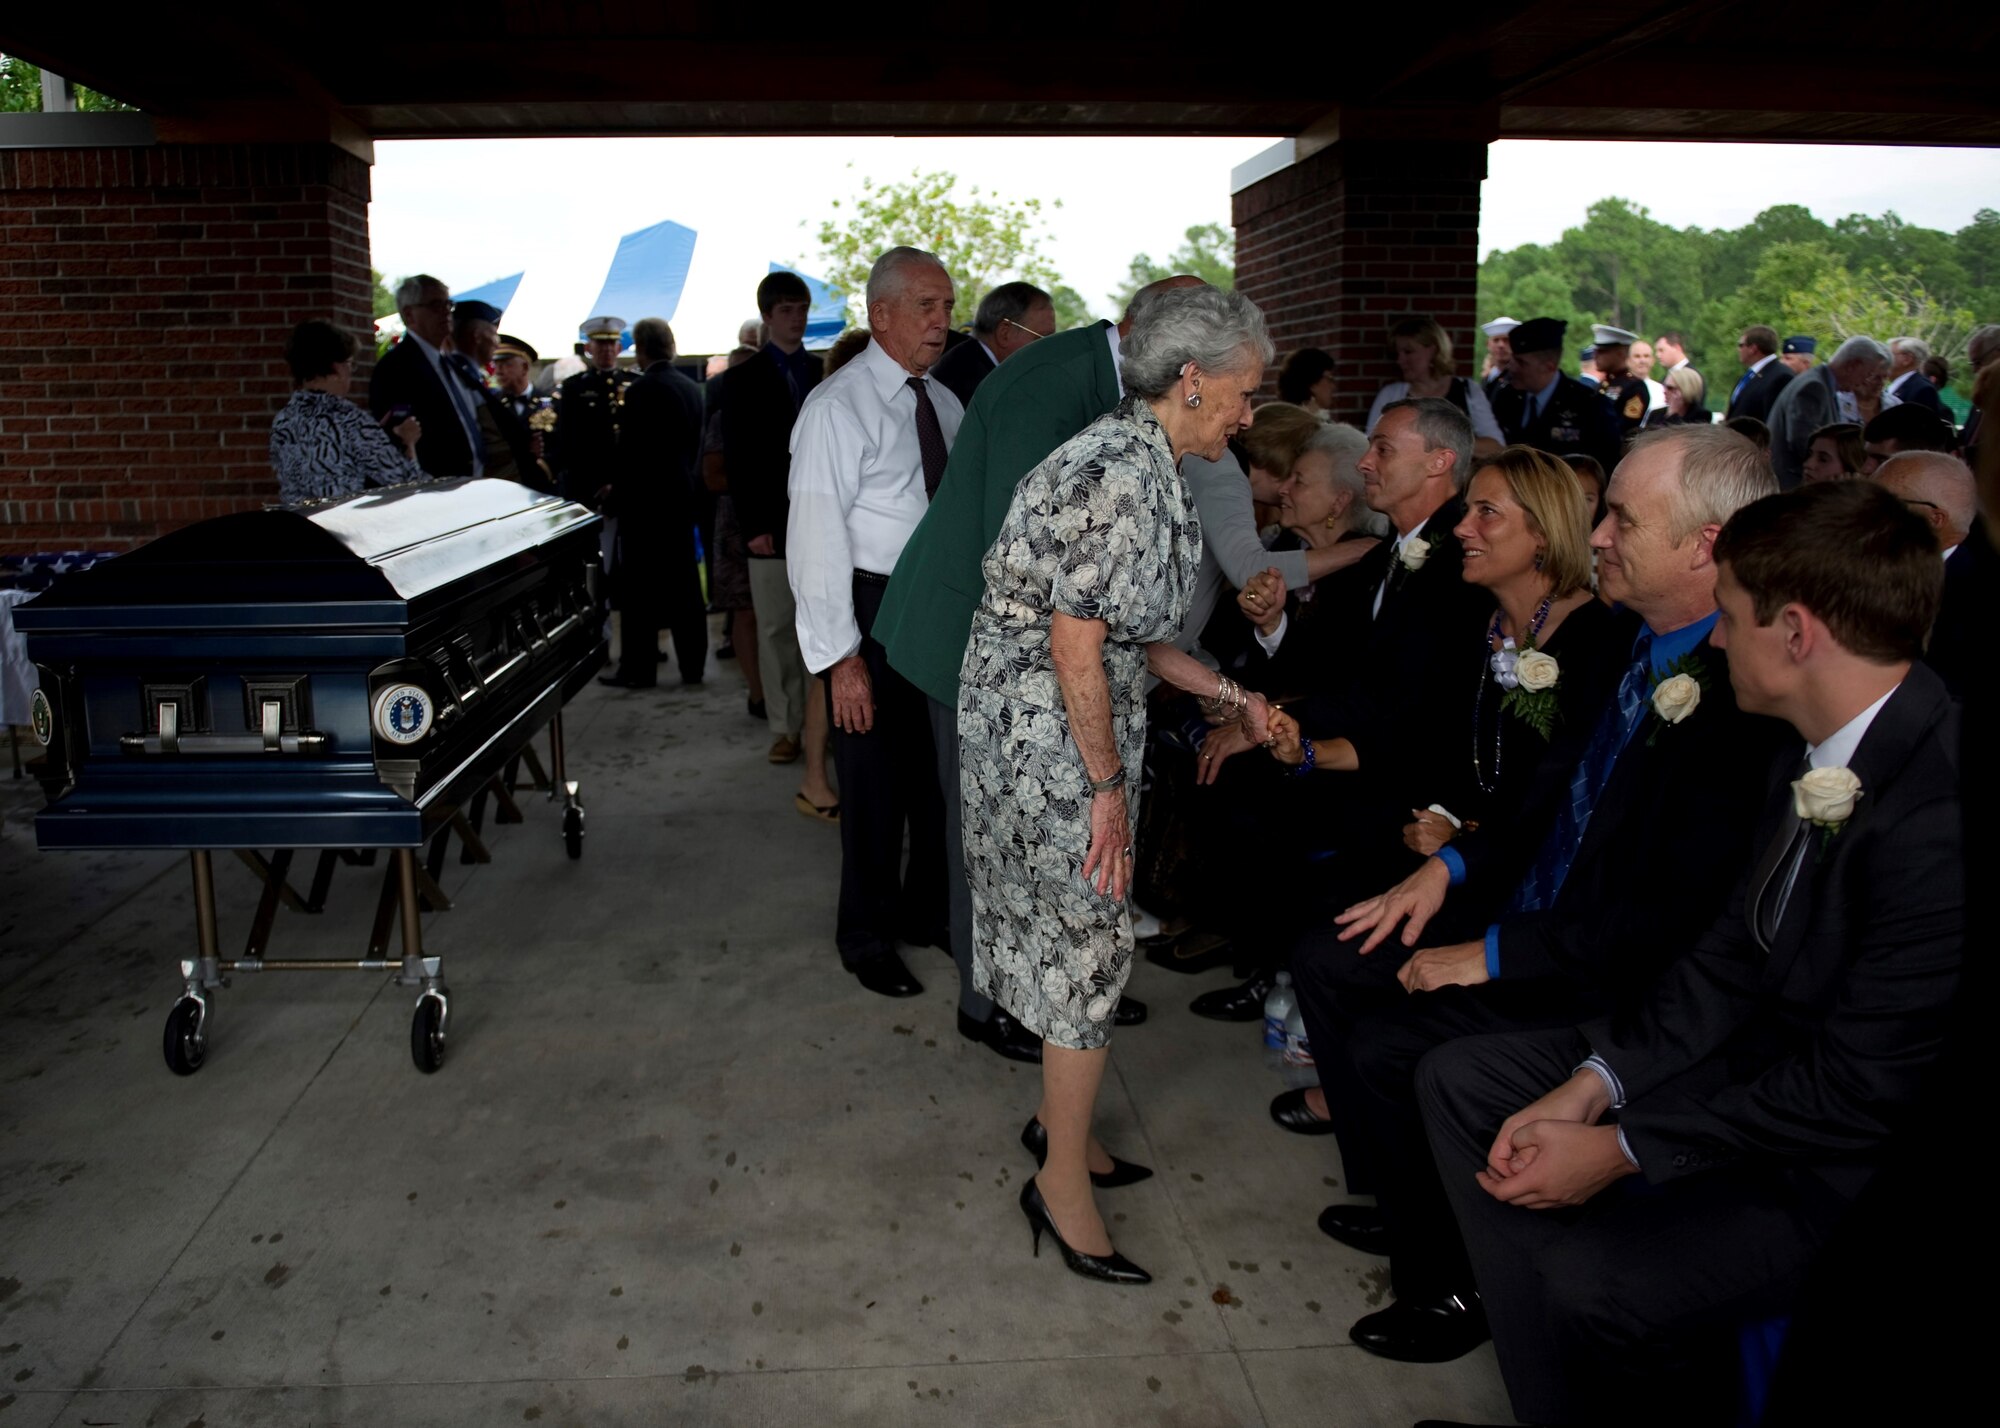 Guests pay their final respects to retired U.S. Air Force Col. George “Bud” Day’s family upon the conclusion of his funeral service at Barrancas National Cemetery on Naval Air Station Pensacola, Fla., Aug. 1, 2013. Day, a Medal of Honor recipient and combat pilot with service in World War II, Korea and Vietnam, passed away July 27 at the age of 88. (U.S. Air Force Photo/Staff Sgt. John Bainter) 